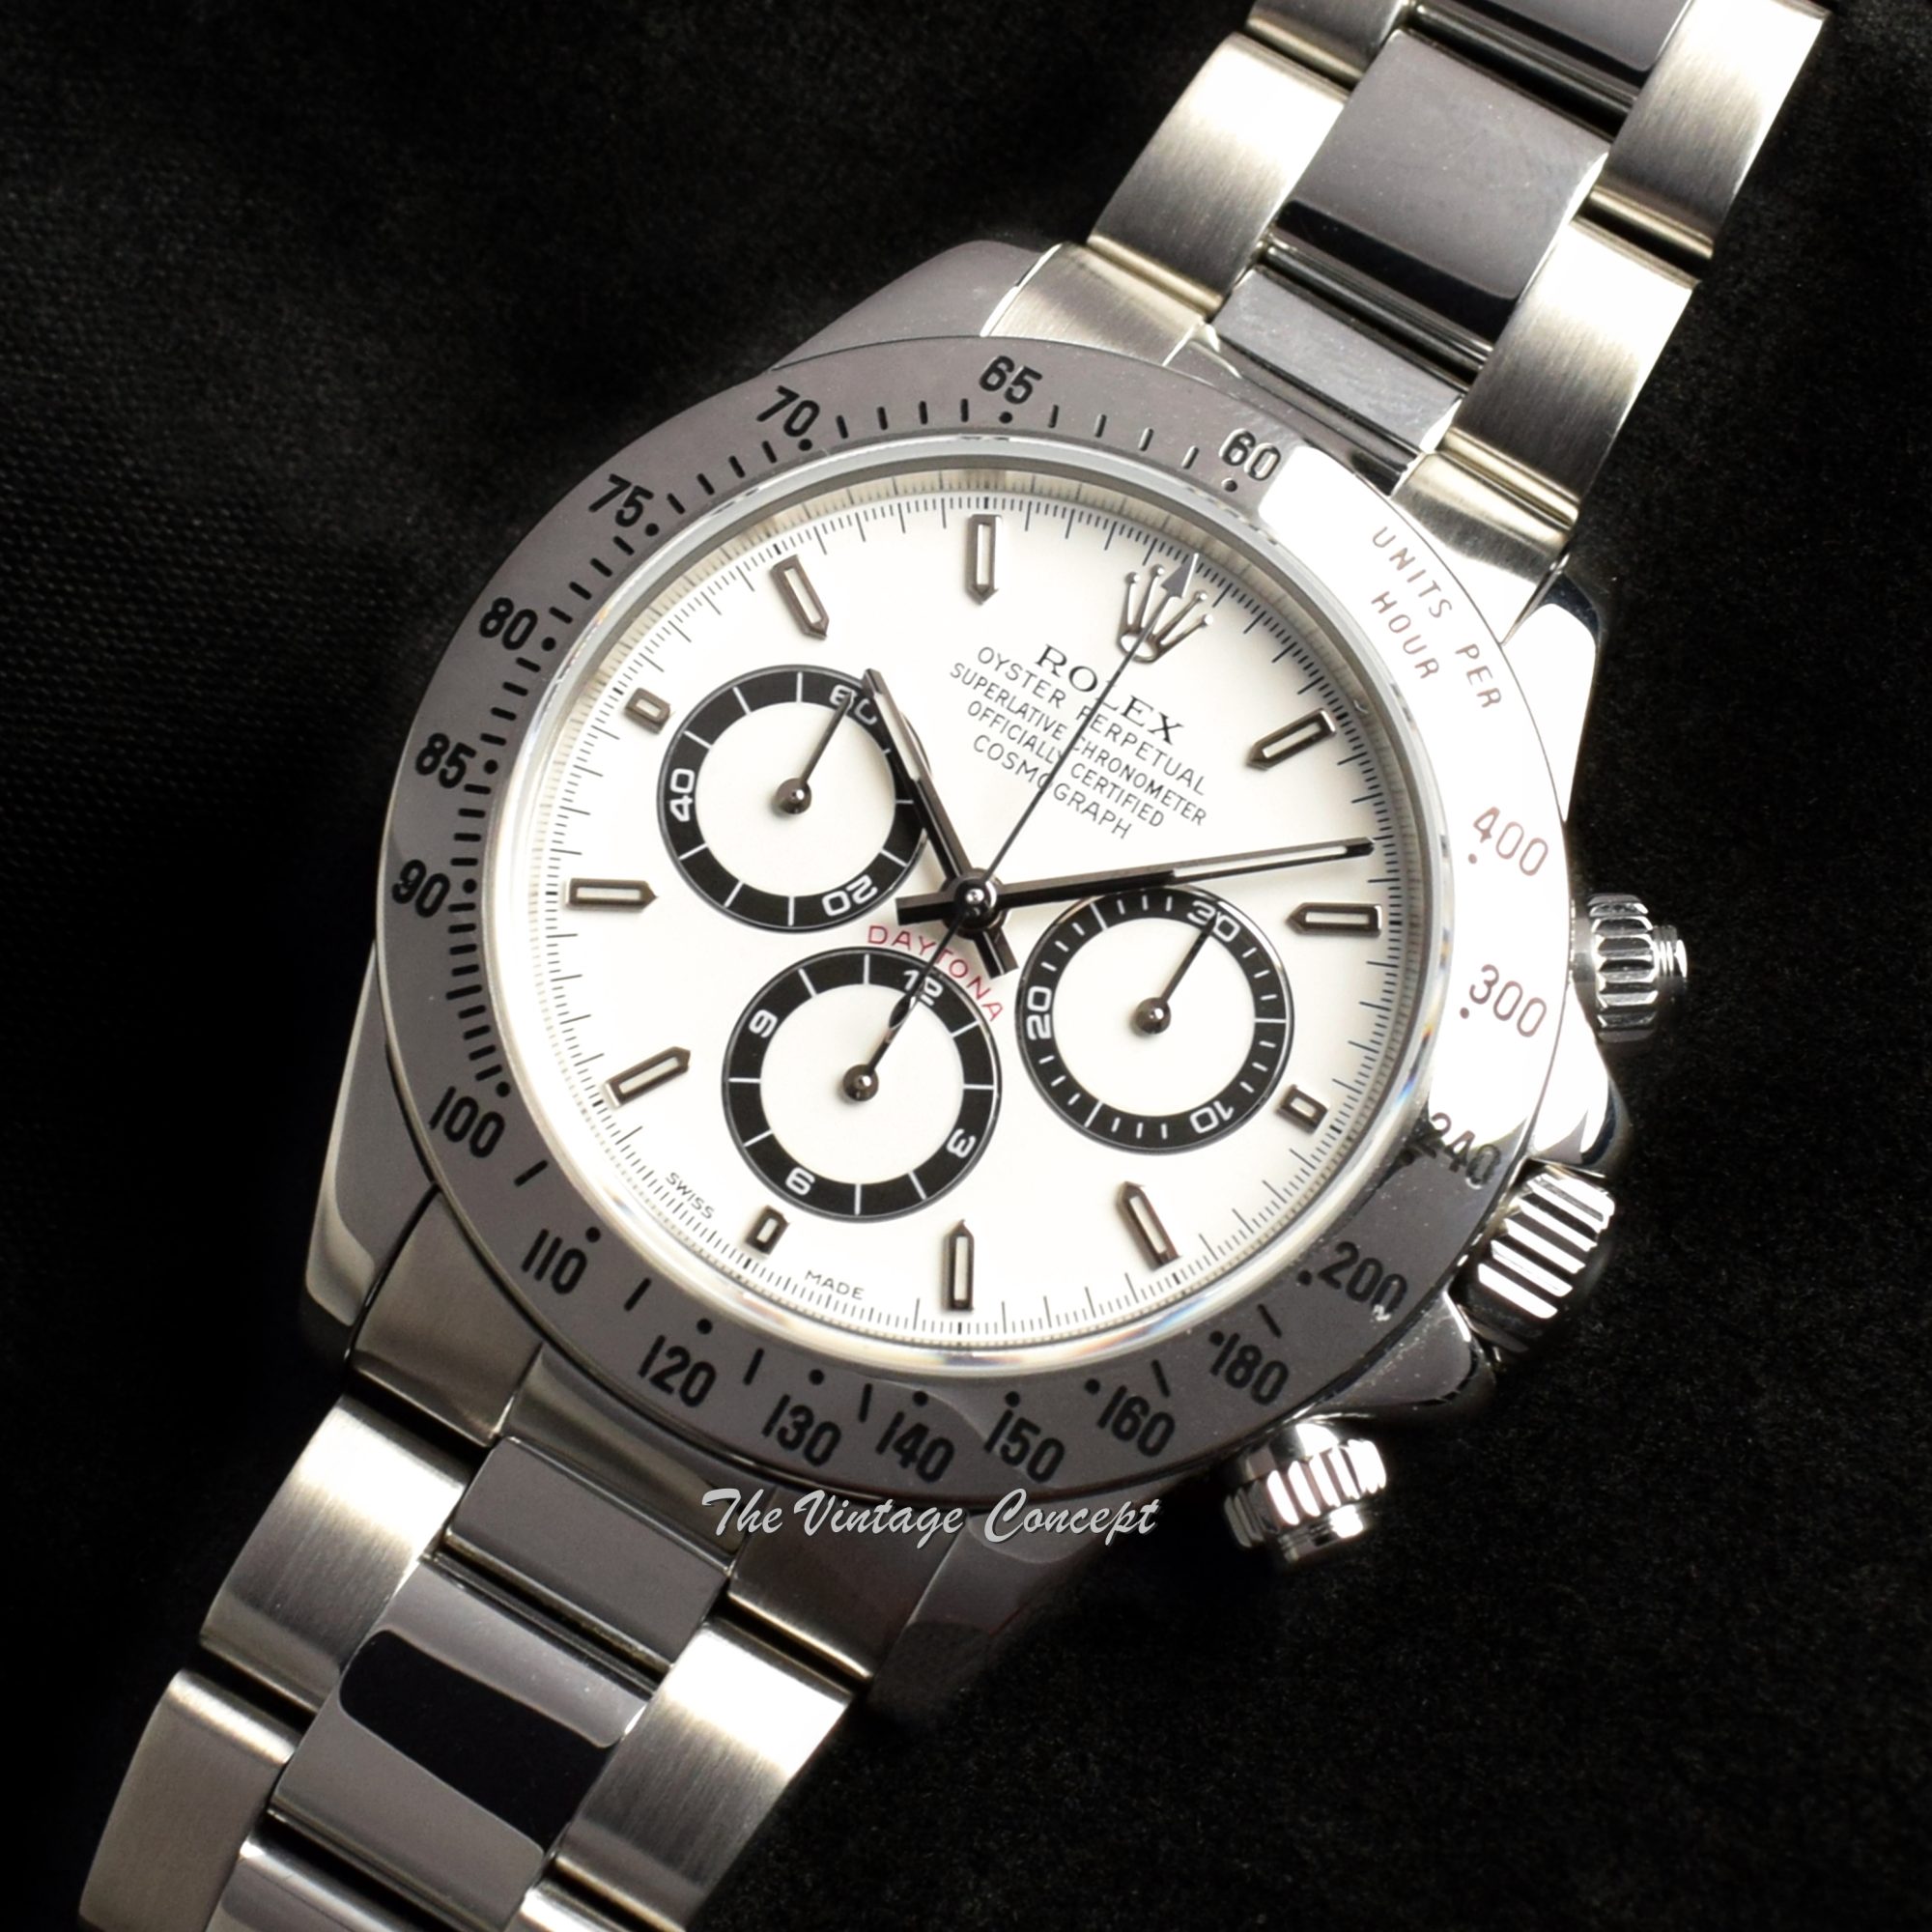 Rolex Daytona "A Series" White Dial 16520 w/ Recent Service Record ( SOLD ) - The Vintage Concept